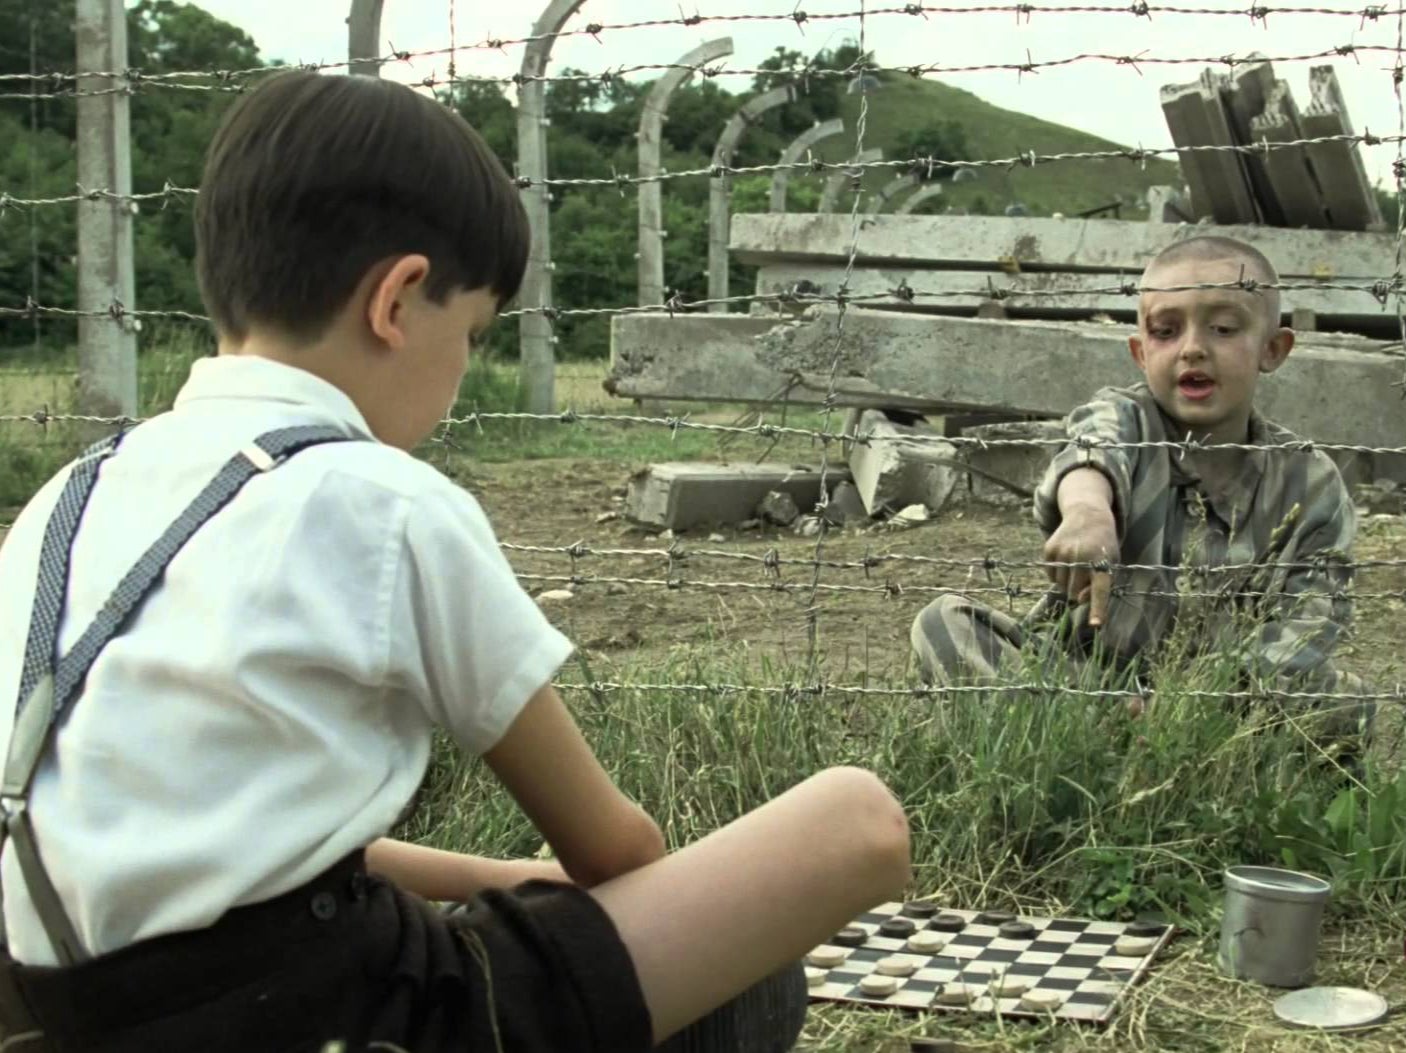 A still from the 2008 film ‘The Boy in the Striped Pyjamas’